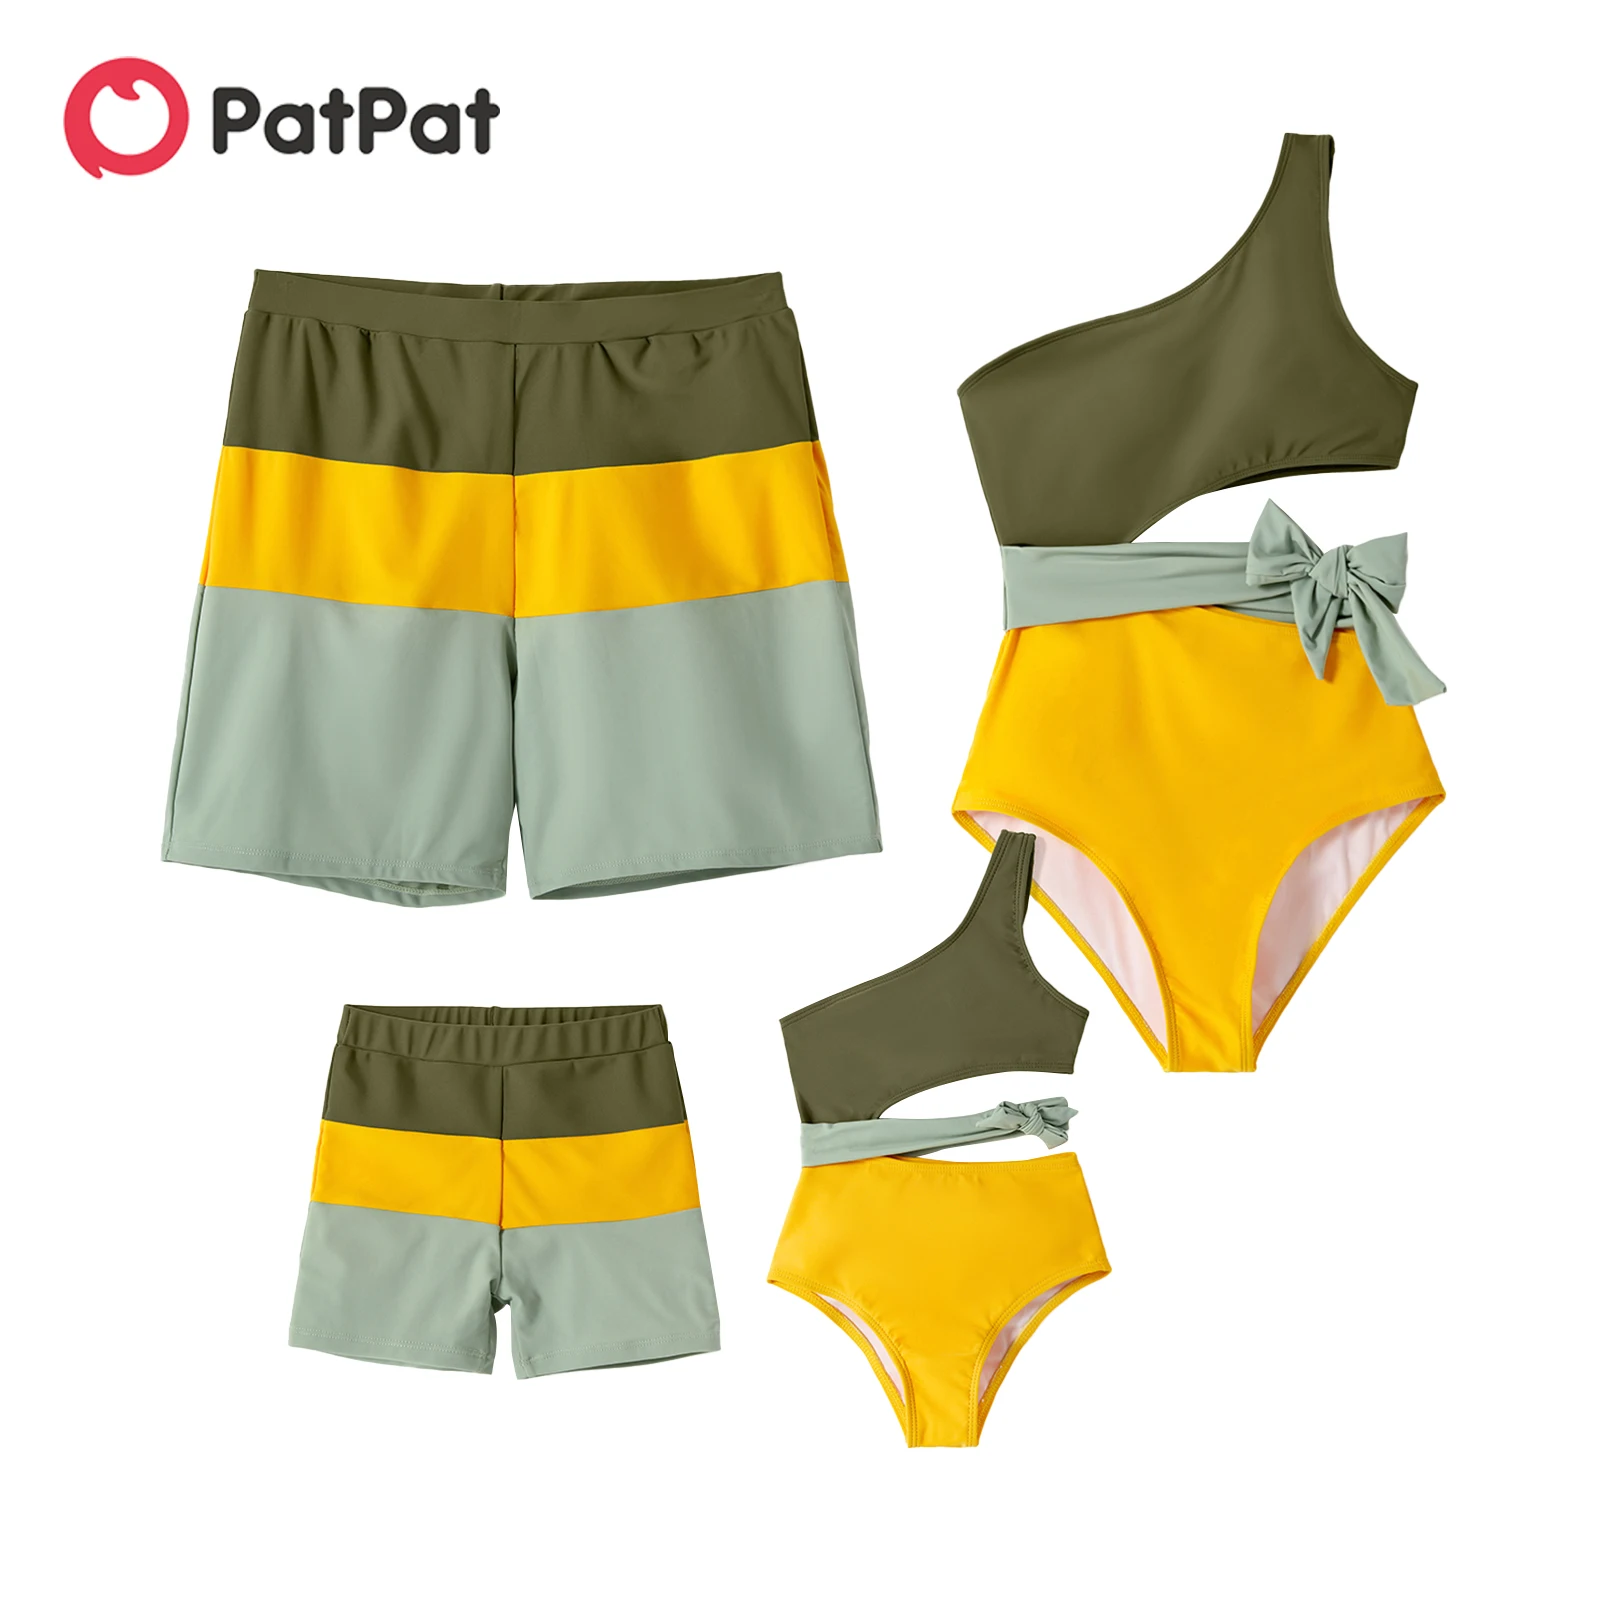 PatPat Family Matching Colorblock One Shoulder One-piece Swimsuit and Swim Trunks